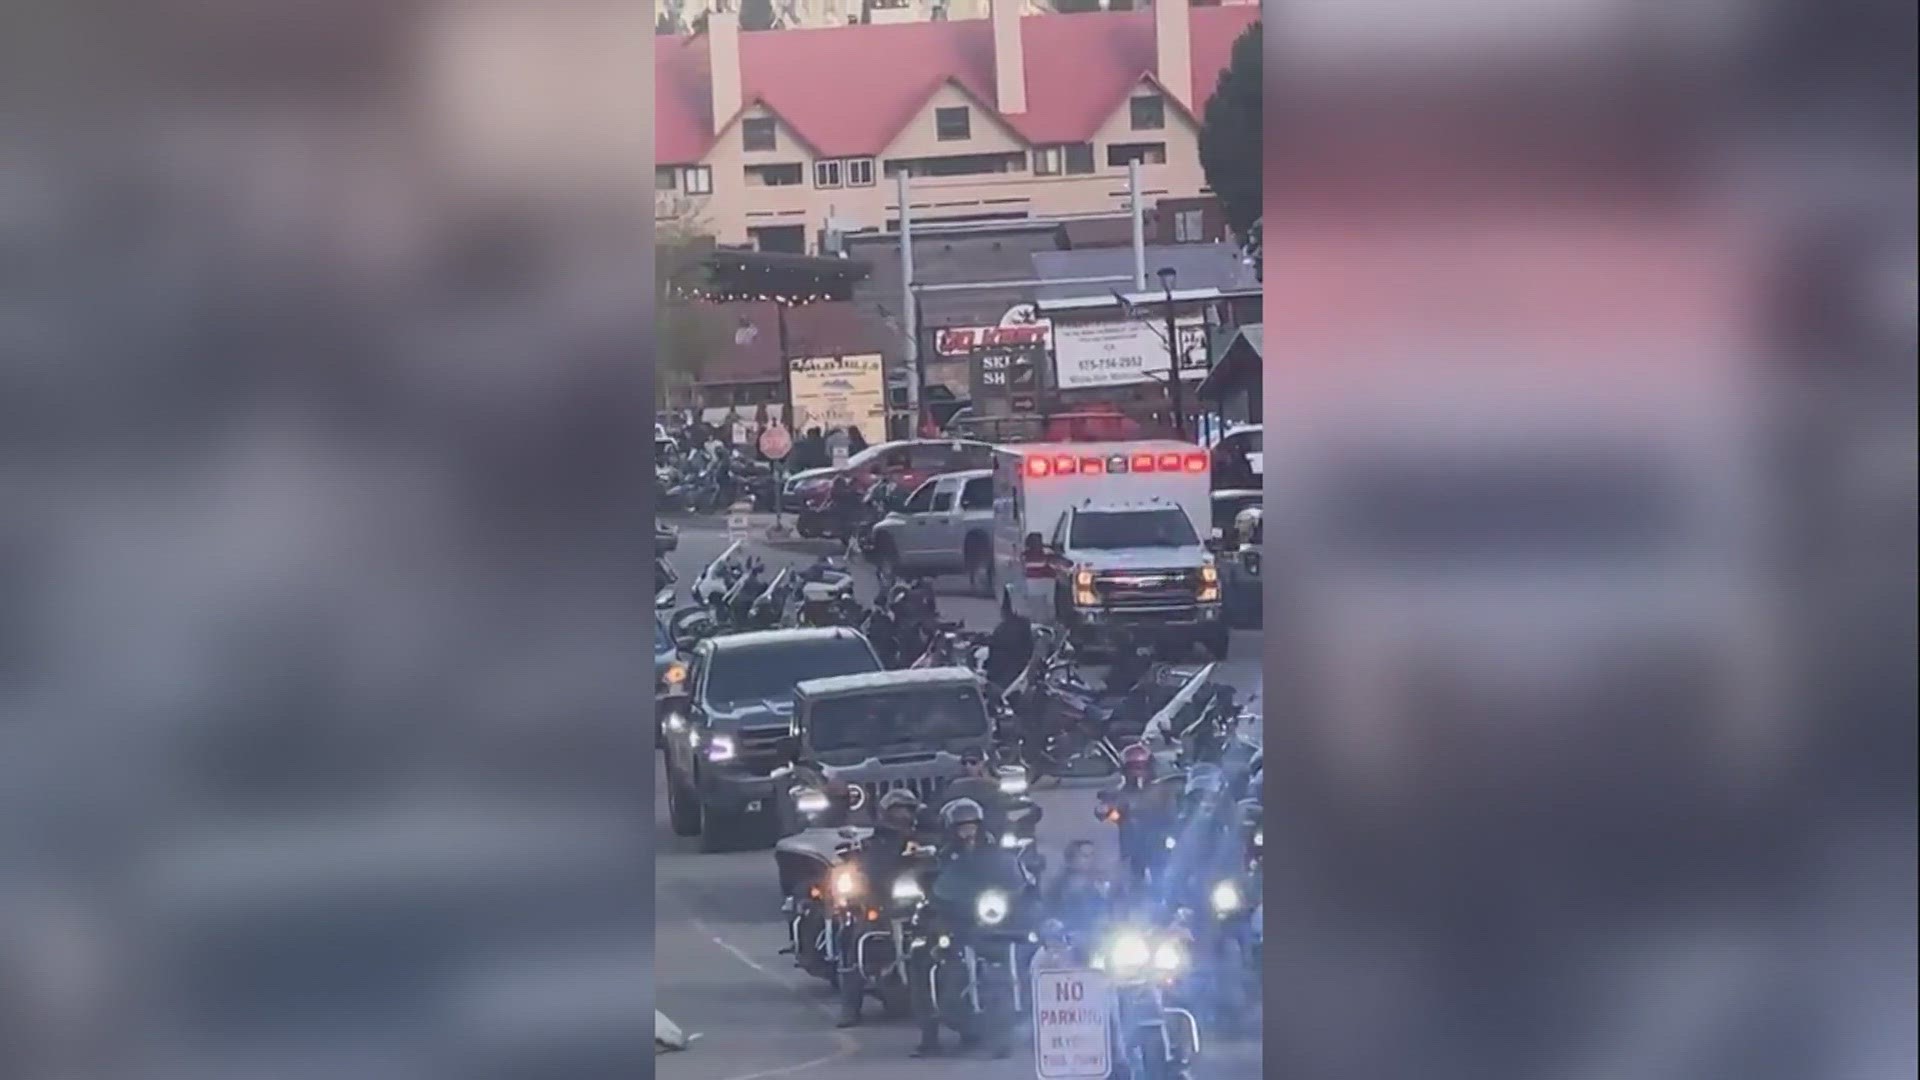 The shooting happened during the town's yearly Memorial Day motorcycle rally that draws in about 28,000 bikers.